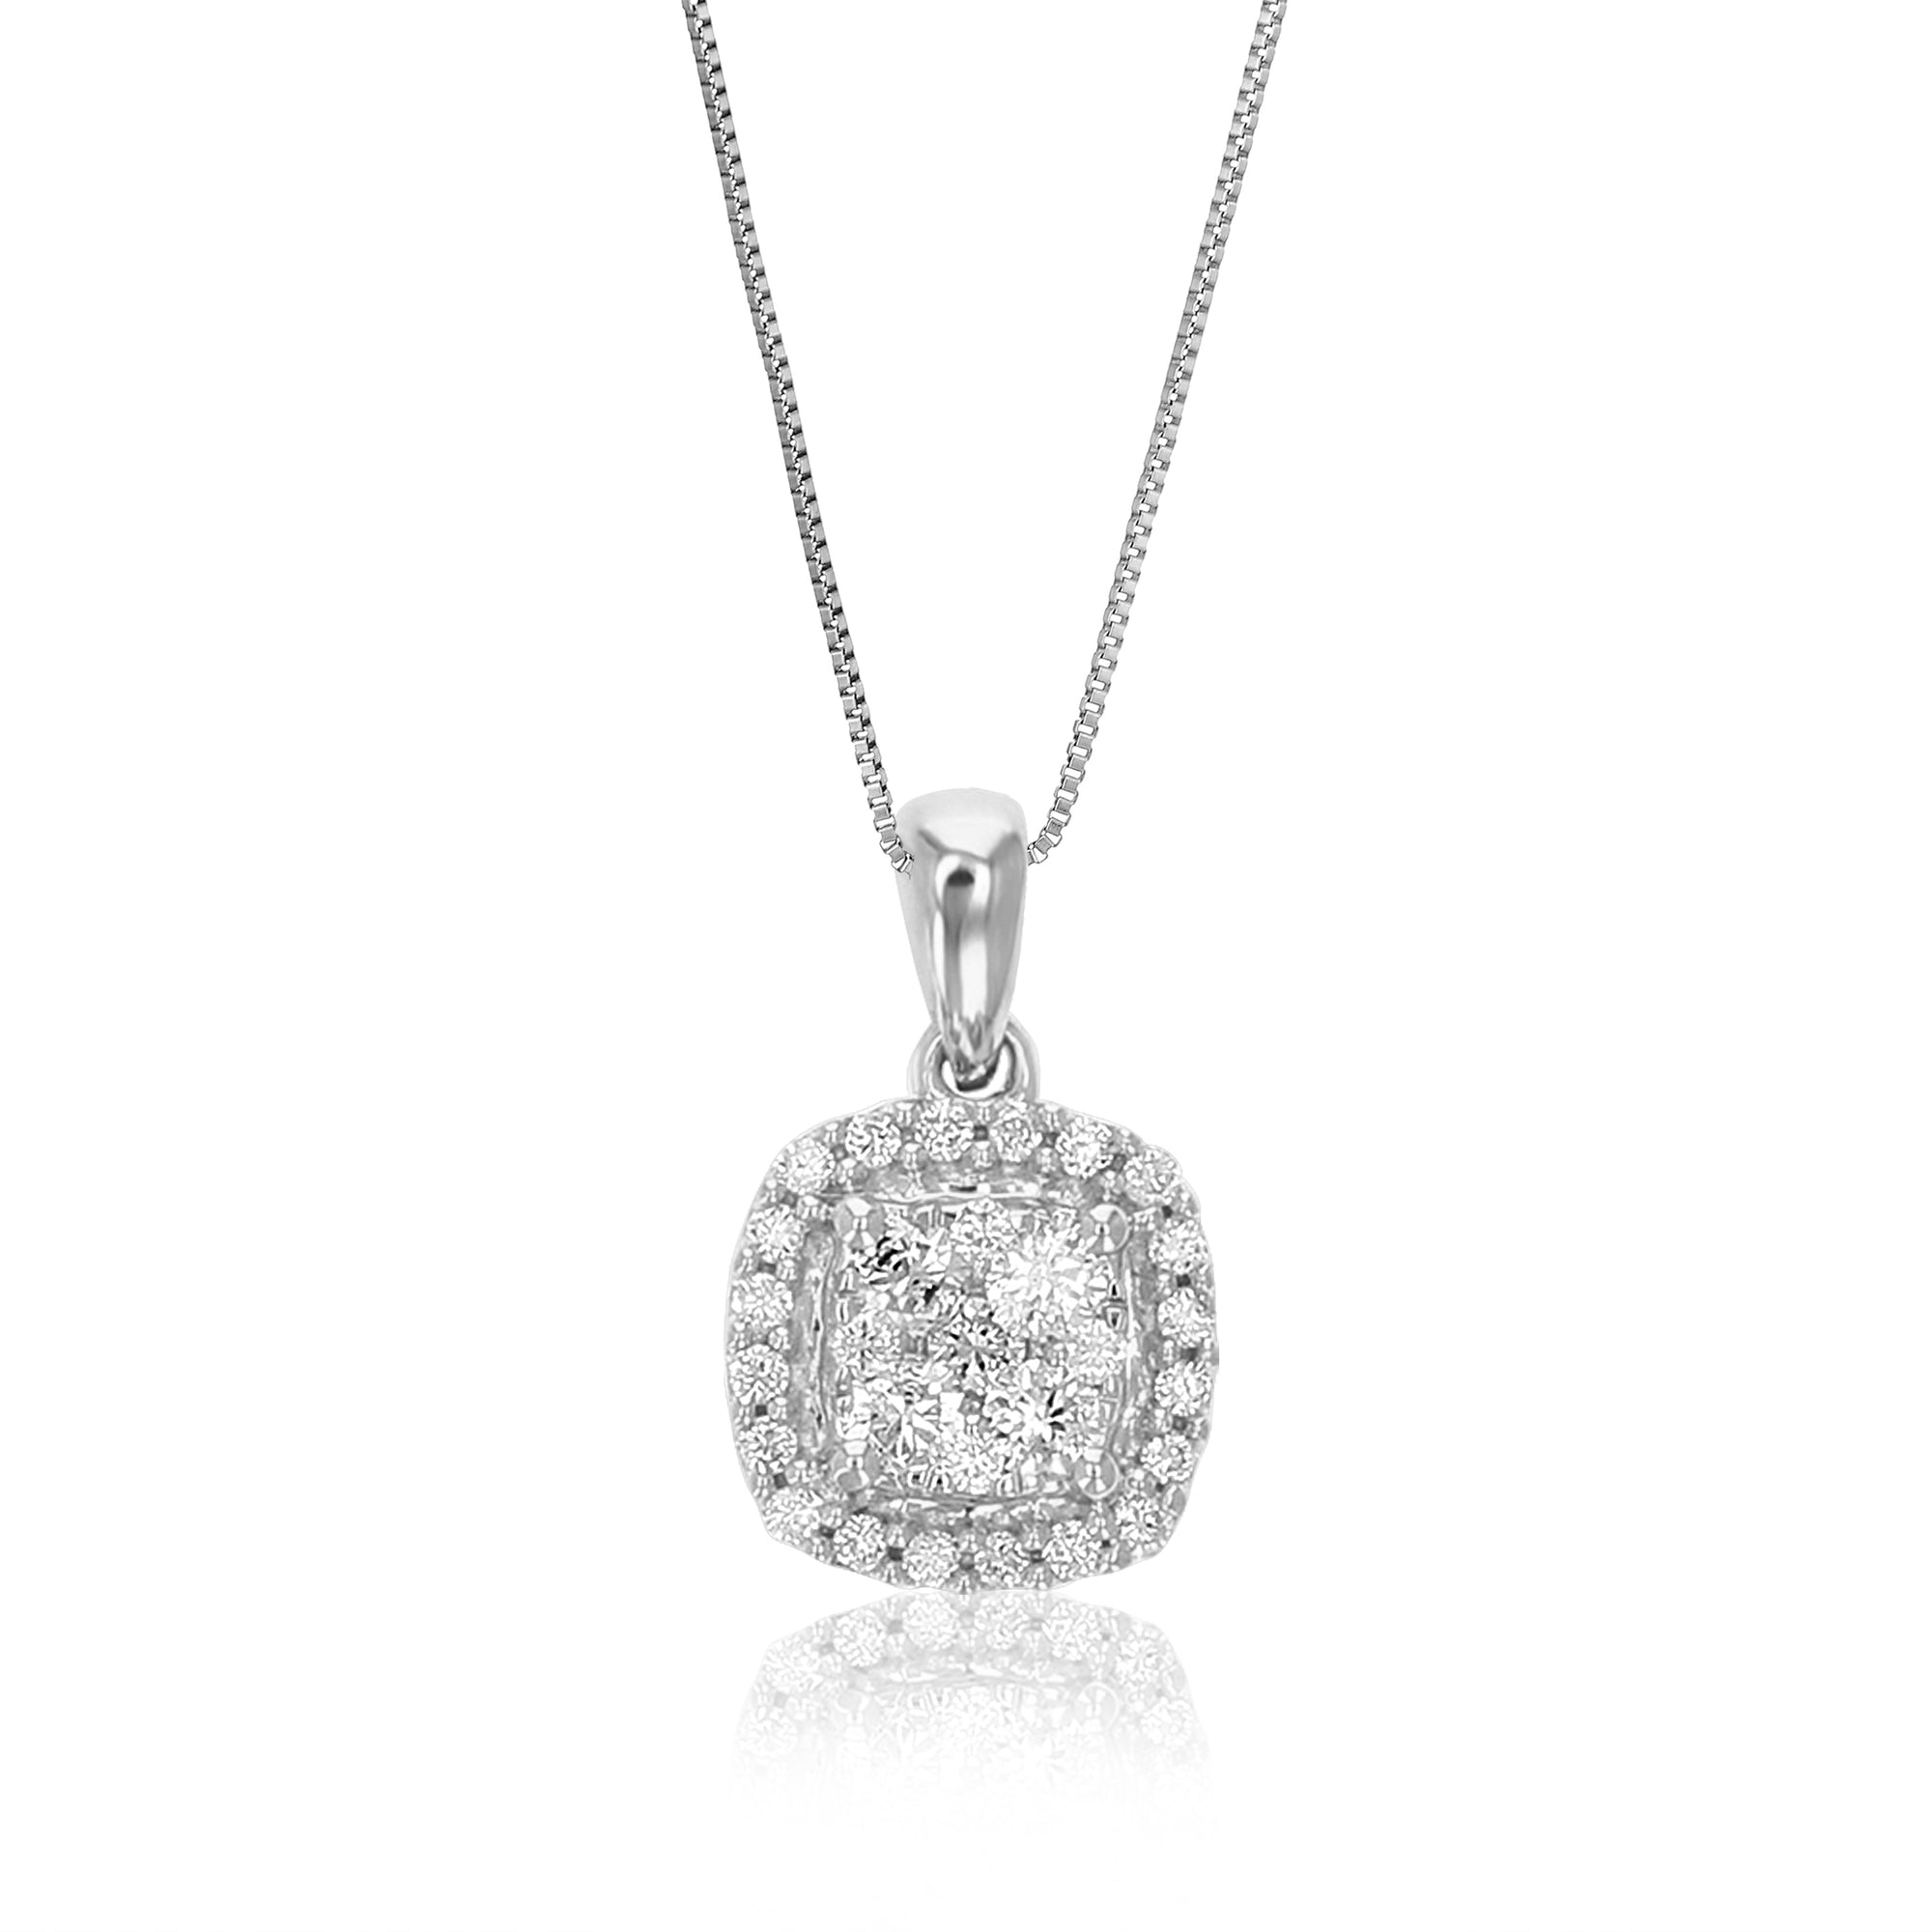 1/4 cttw Diamond Pendant Necklace for Women, Lab Grown Diamond Cushion Cluster Pendant Necklace in .925 Sterling Silver with Chain, Size 1/2 Inch